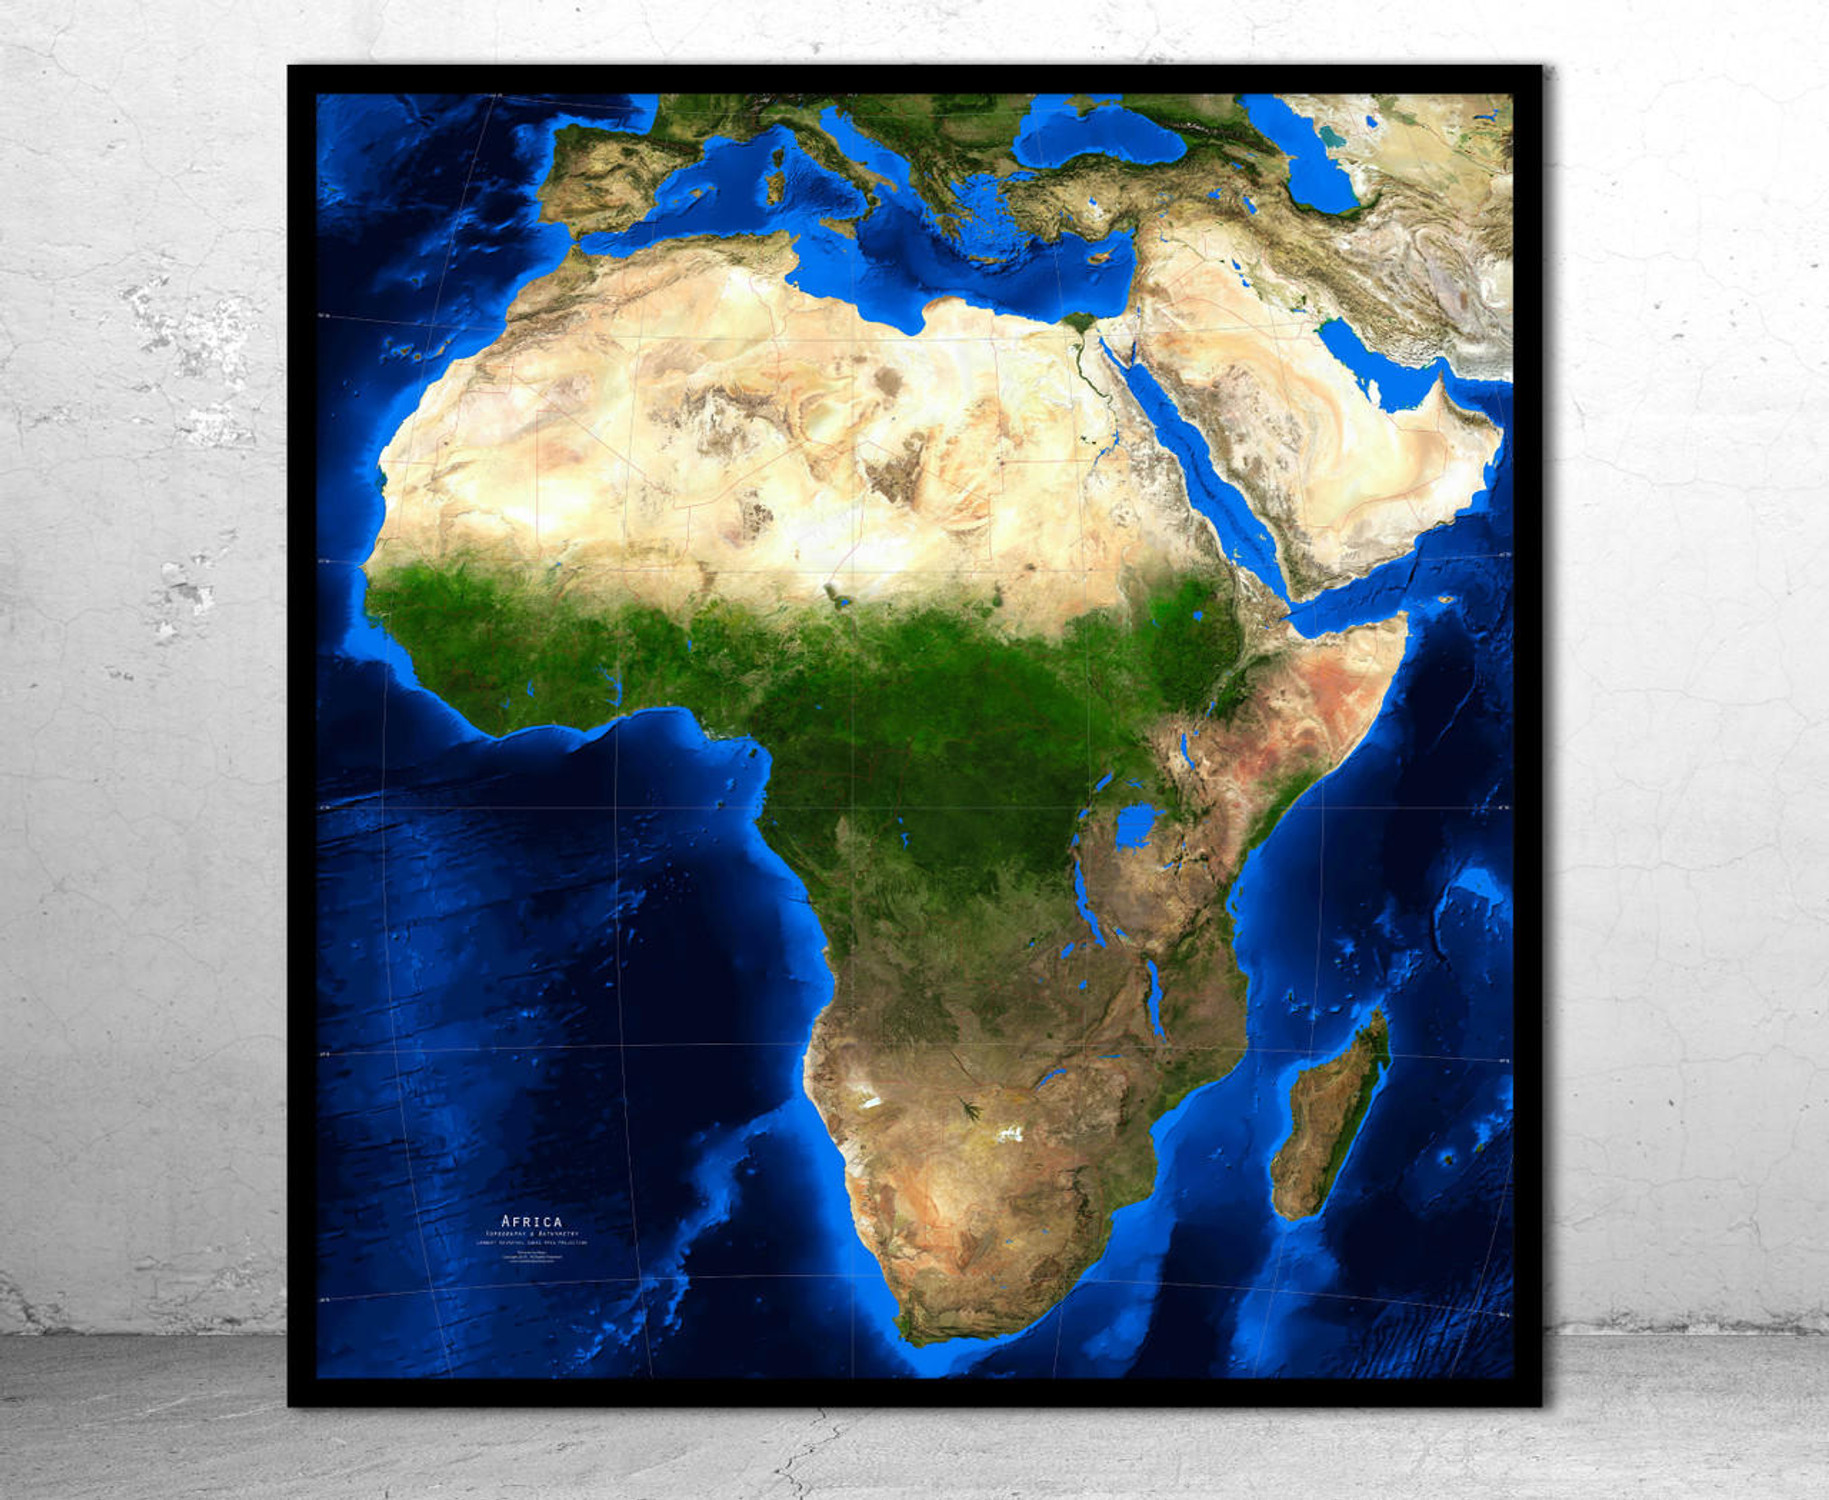 Africa Satellite Image Map - Topography & Bathymetry, image 1, World Maps Online